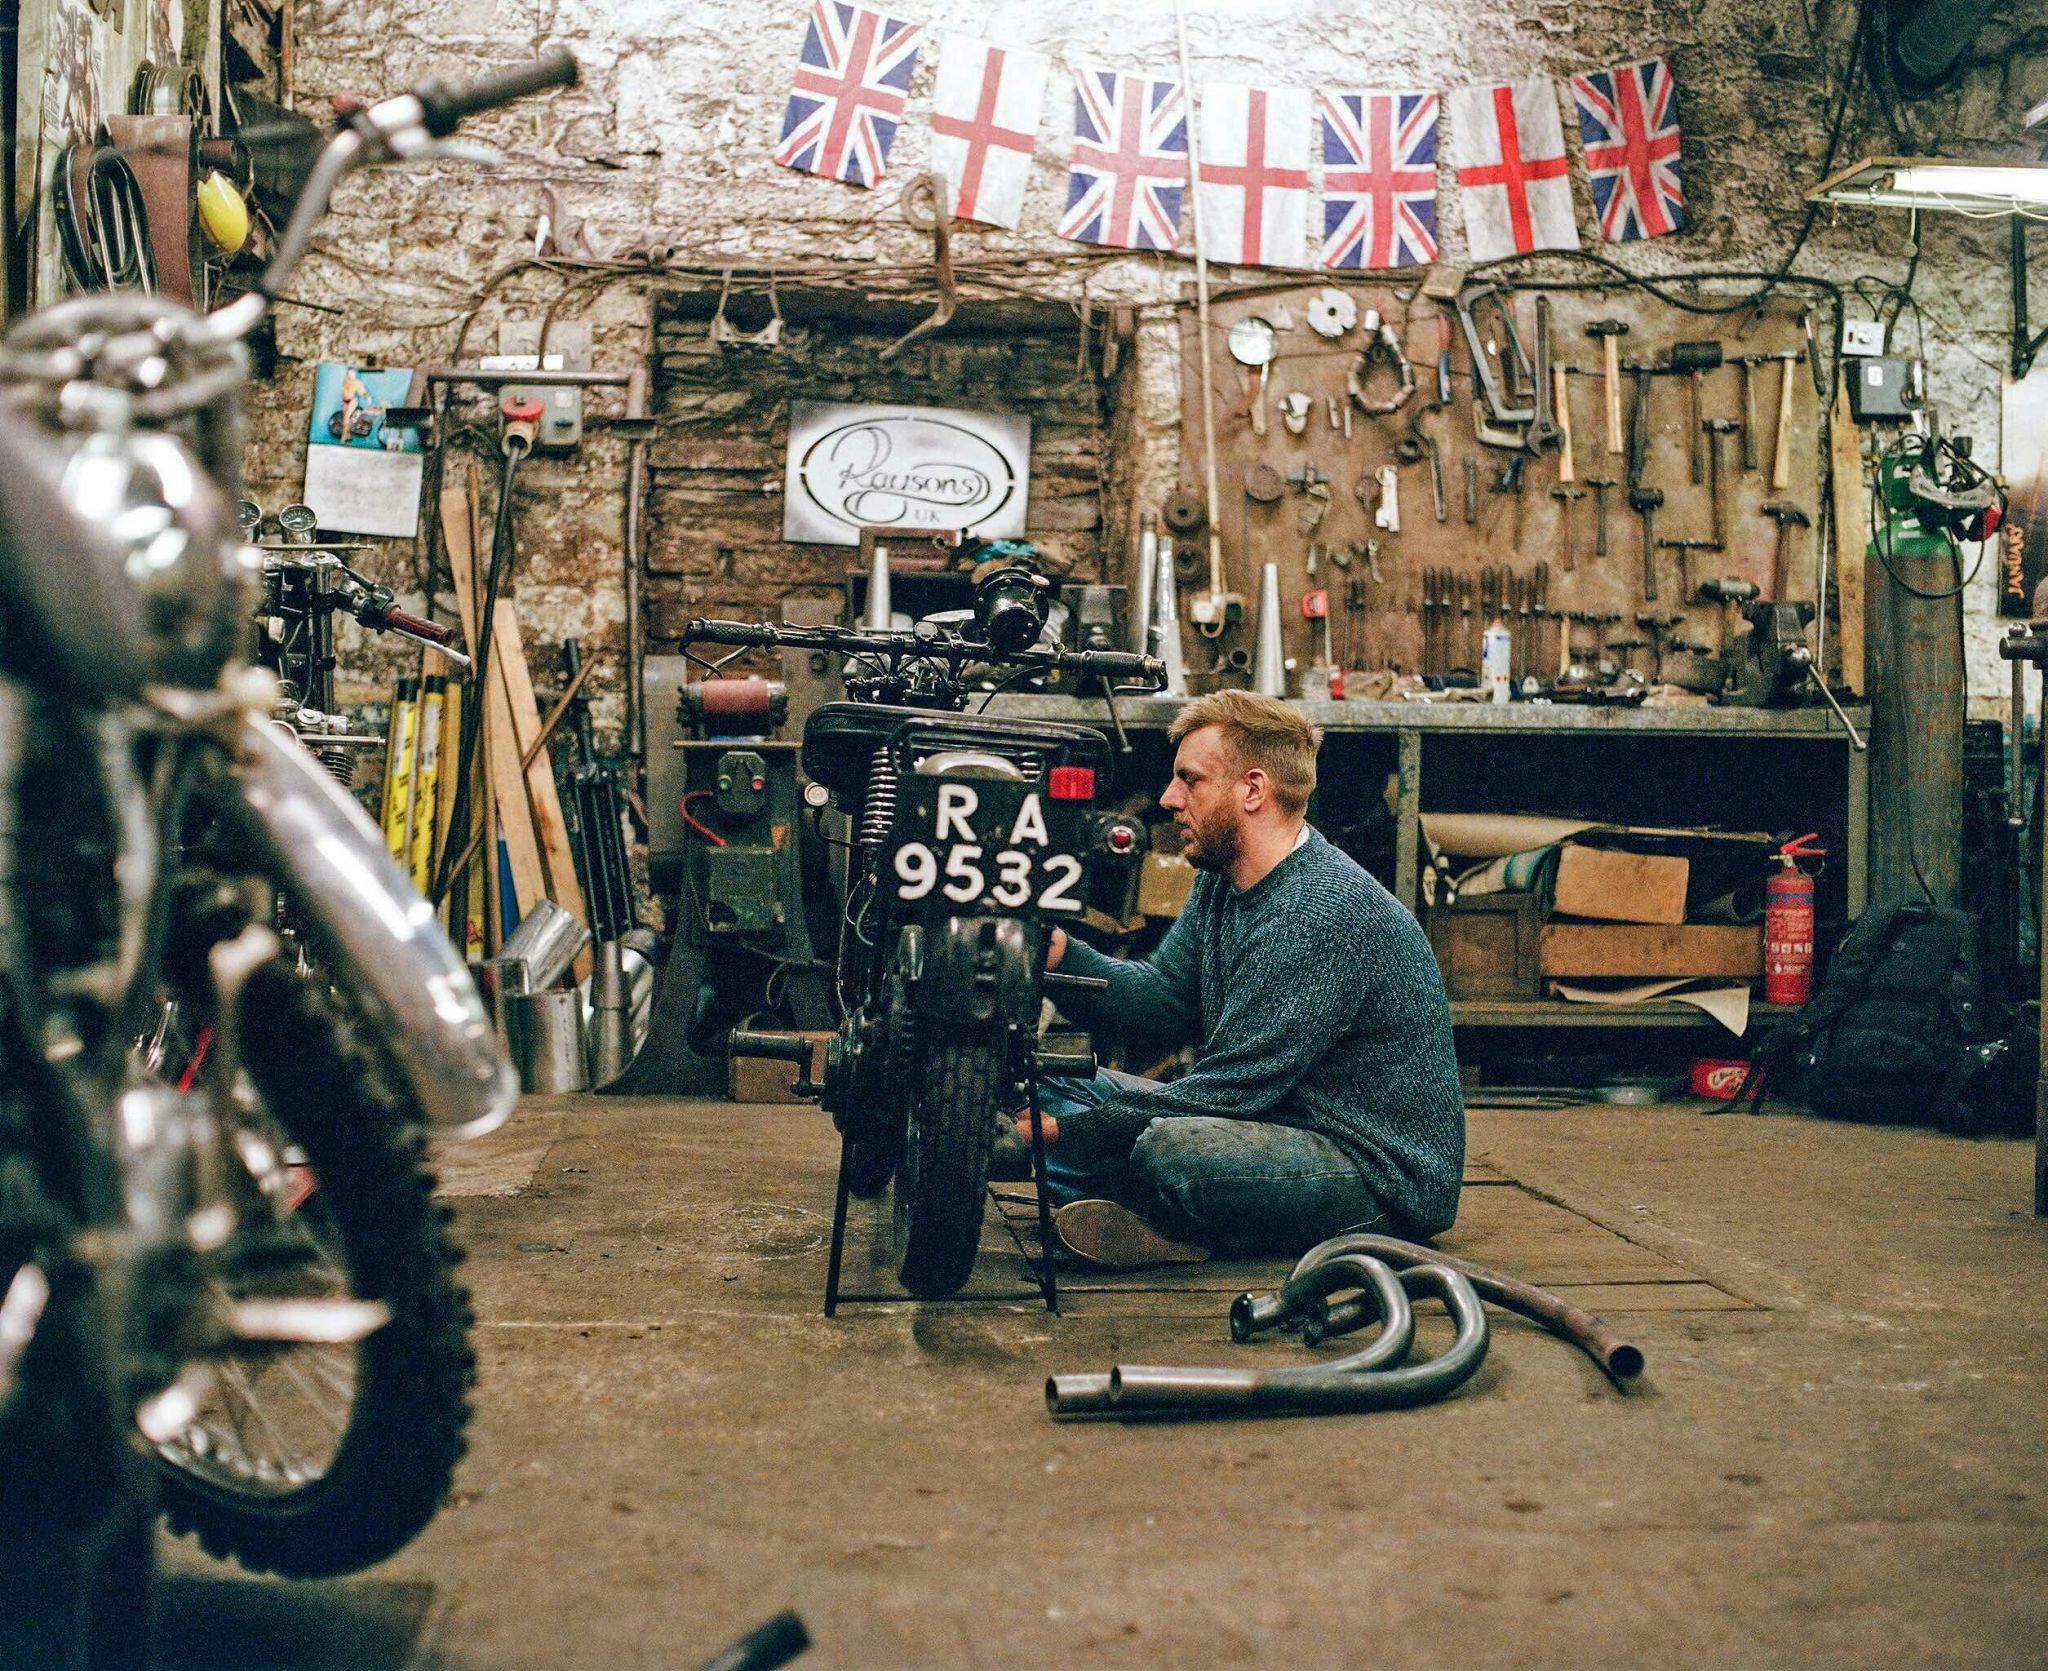 This third-generation exhaust fabricator is helping save Britain's classic  bikes - Hagerty Media